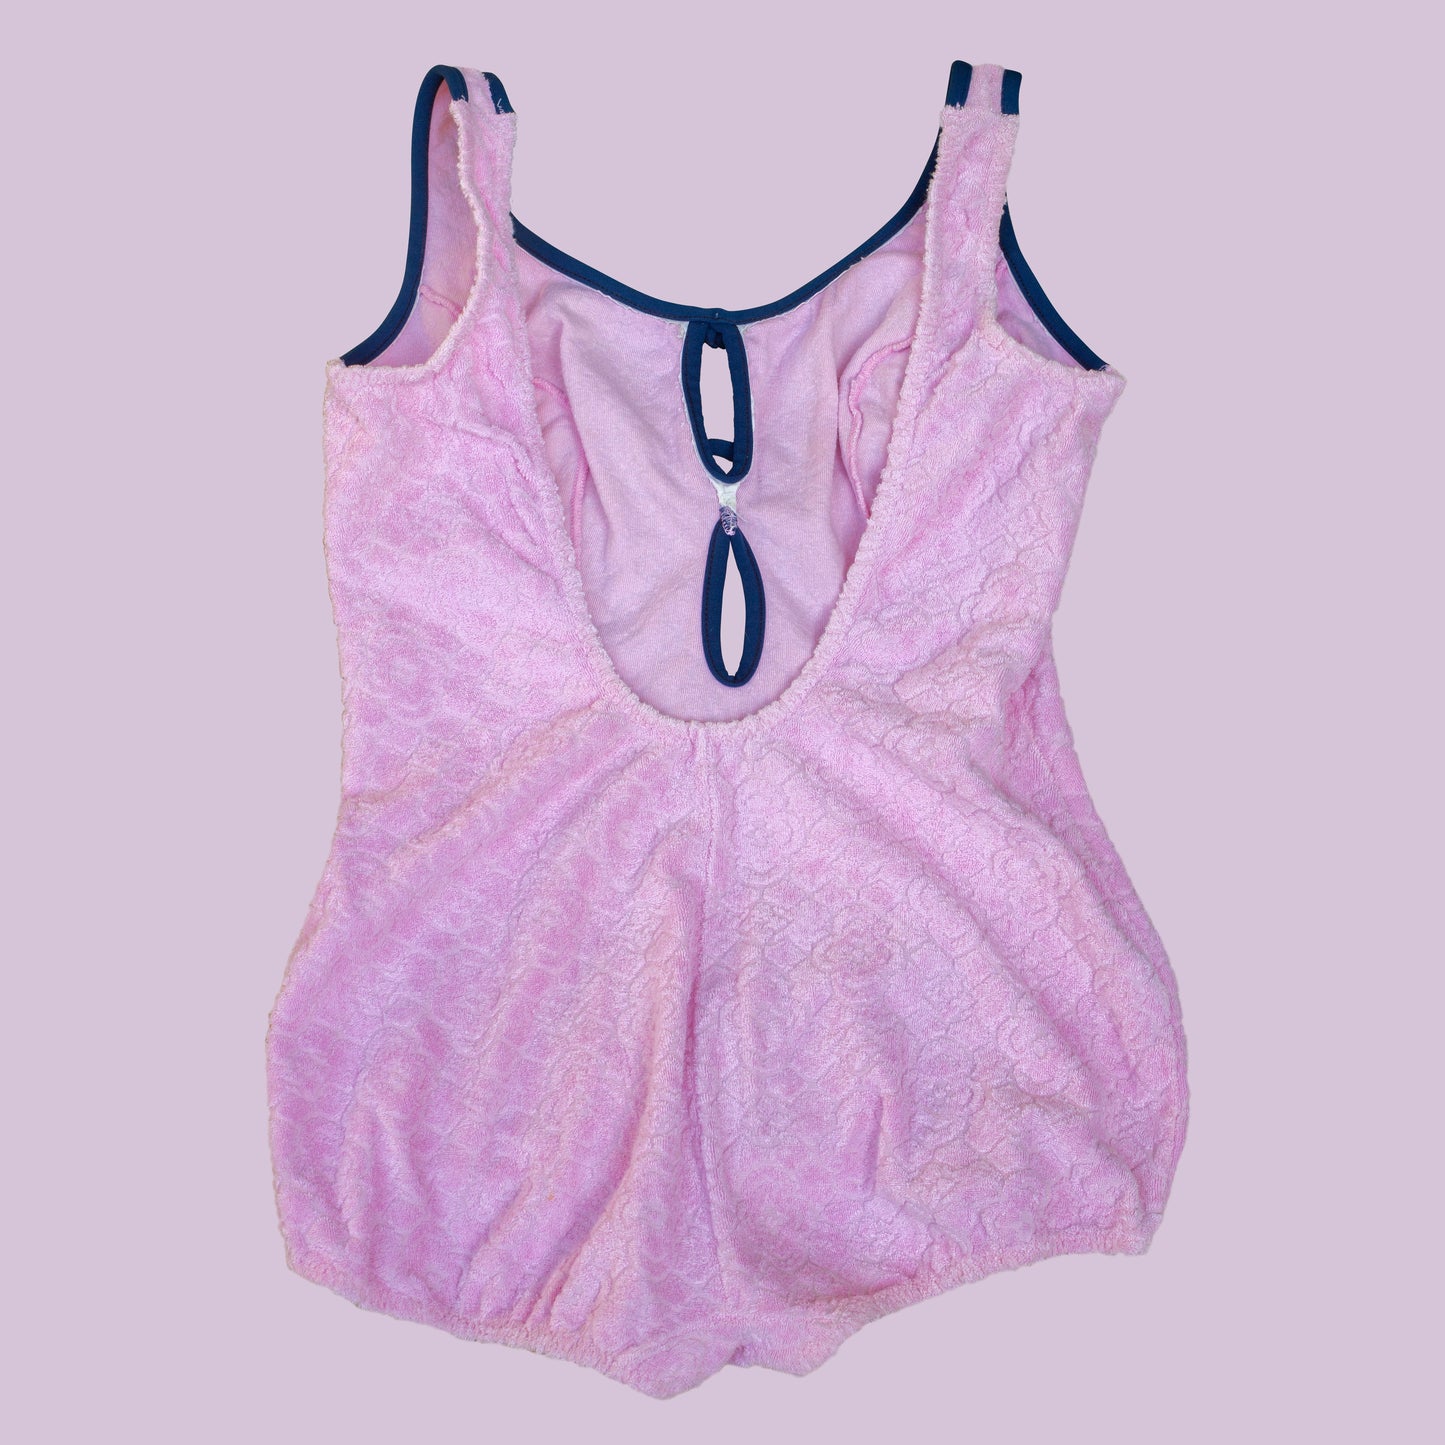 Vintage 1960s Pink Terry Cloth Swimsuit